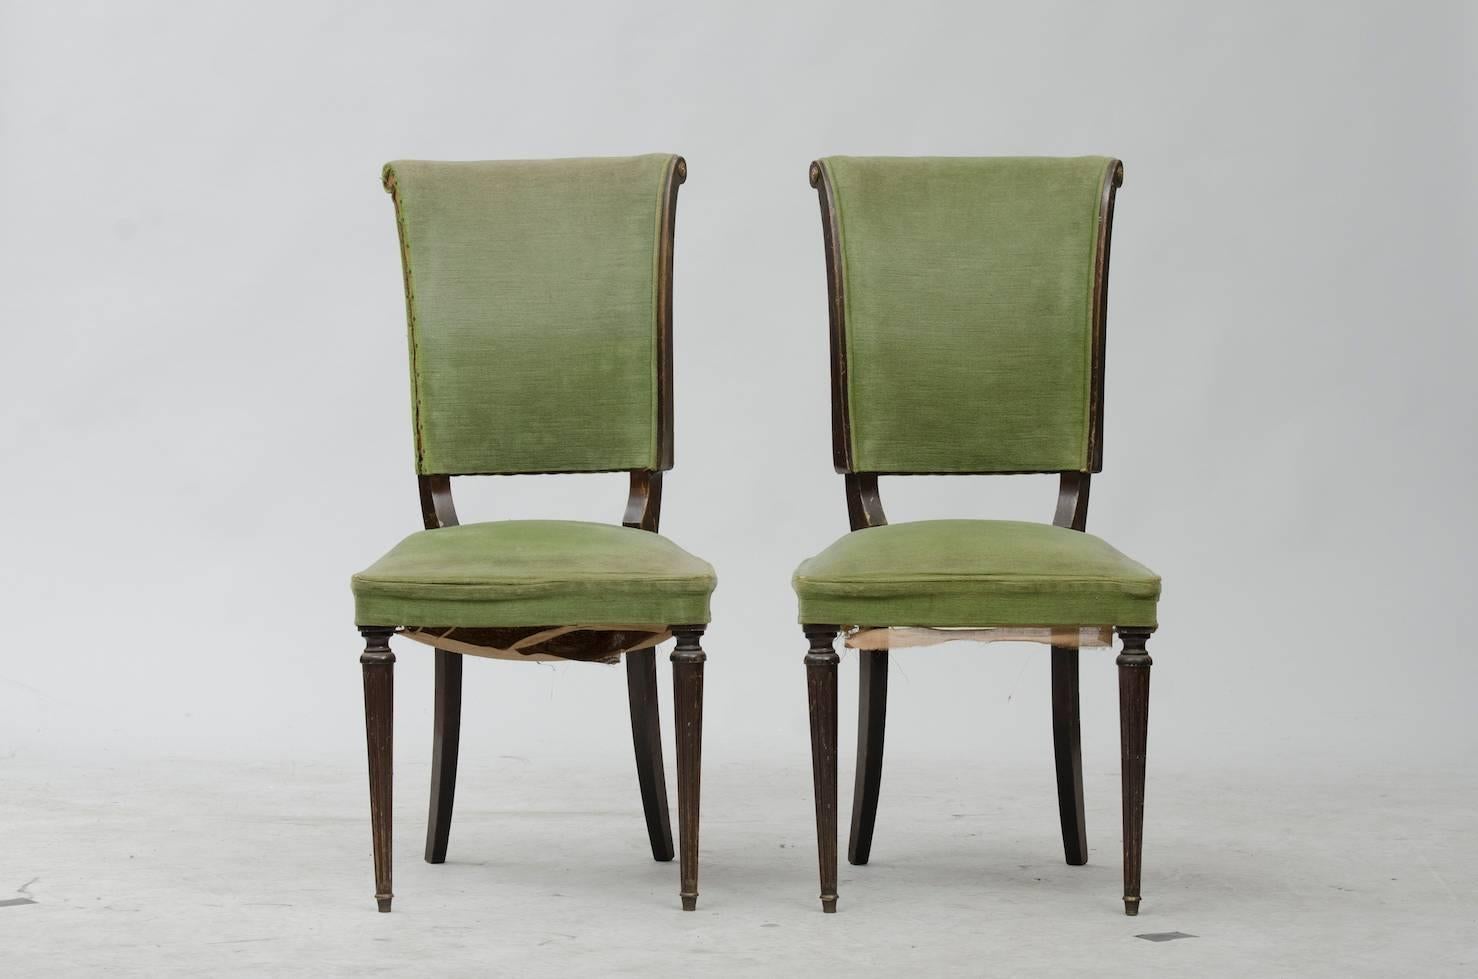 Art Deco high back dining chairs, set of six.
Price fully restored: 4500€ (for the six)
The price shown is in the original condition.
We have our own workshop and we can restore these items, including upholstery and all the piece might need.